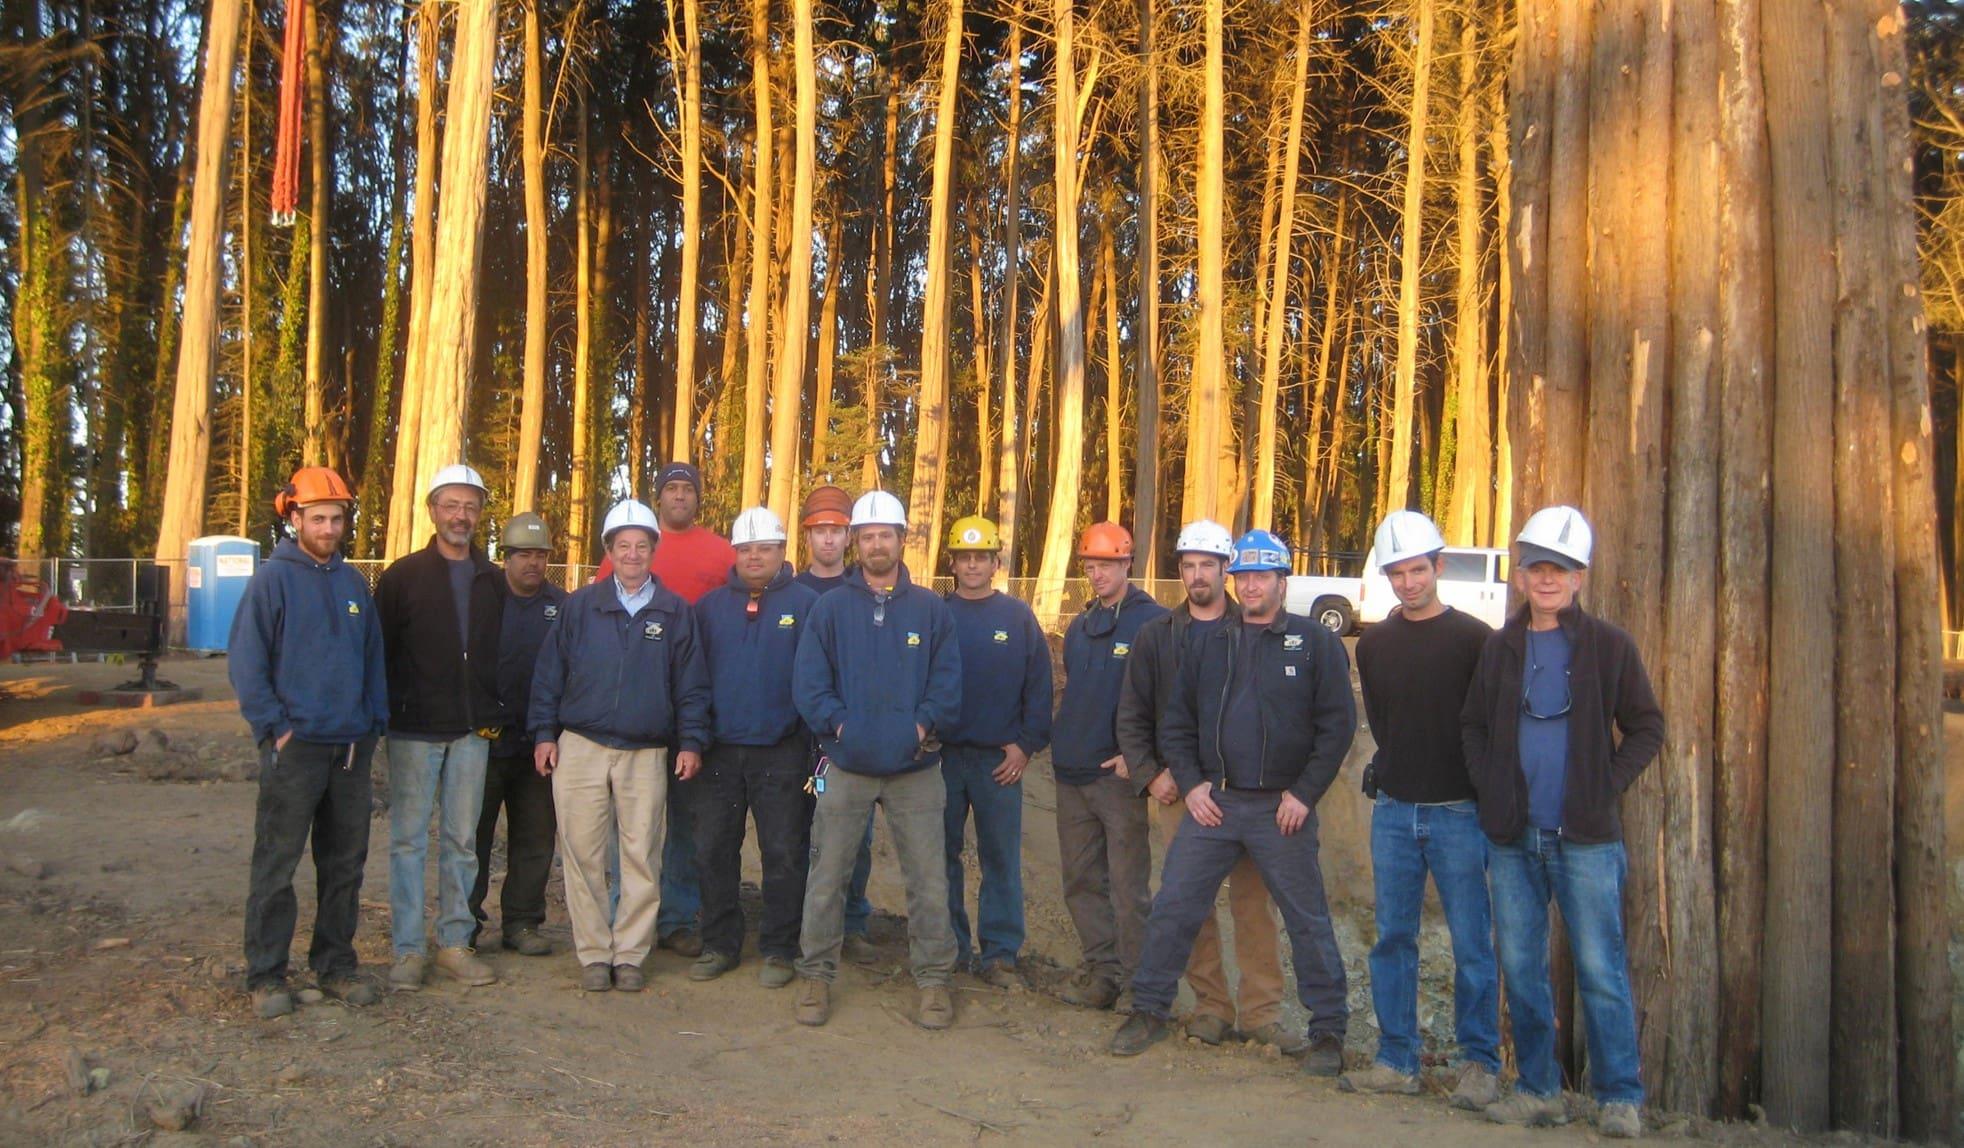 Peter and forestry crew.